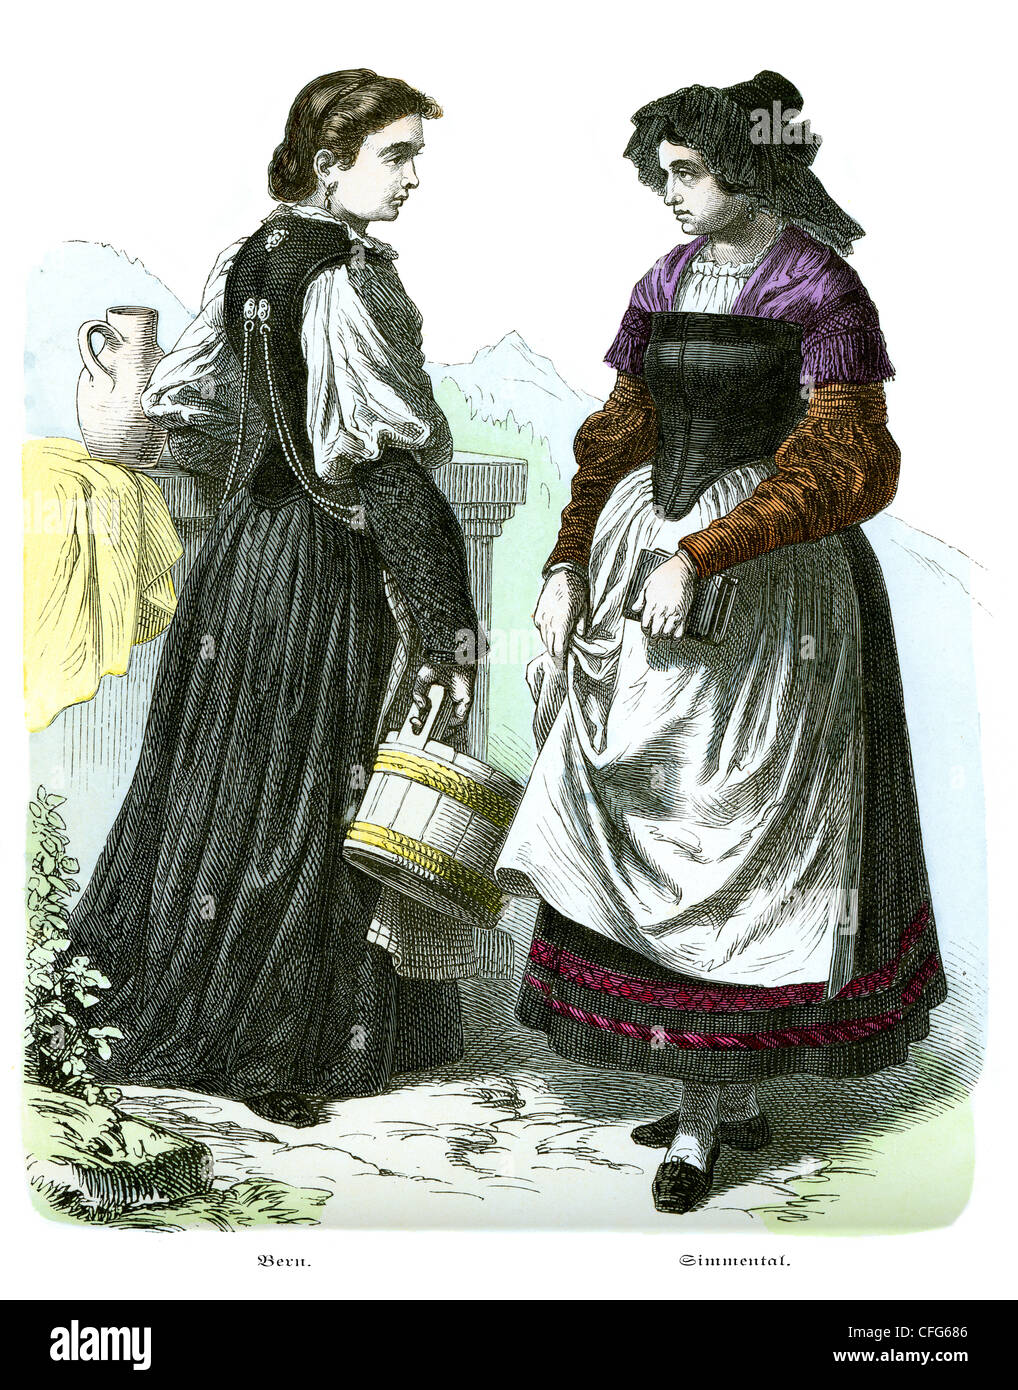 A couple of women in the traditional costume of Switzerland of the 19th Century. Bern and Simmental. Stock Photo